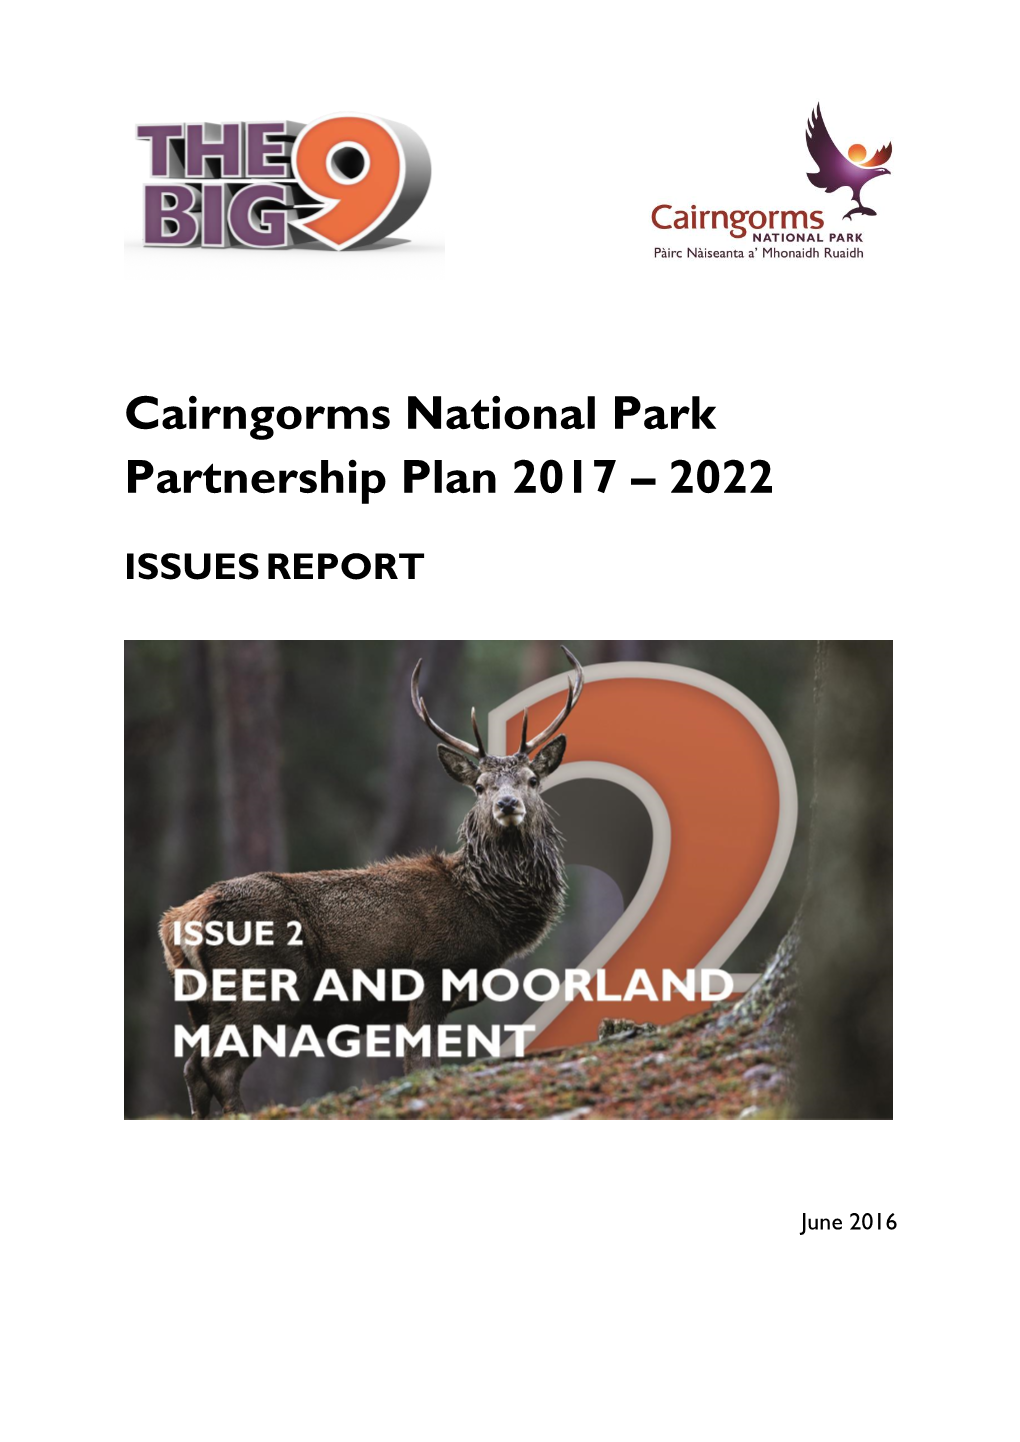 Deer and Moorland Management Evidence Report